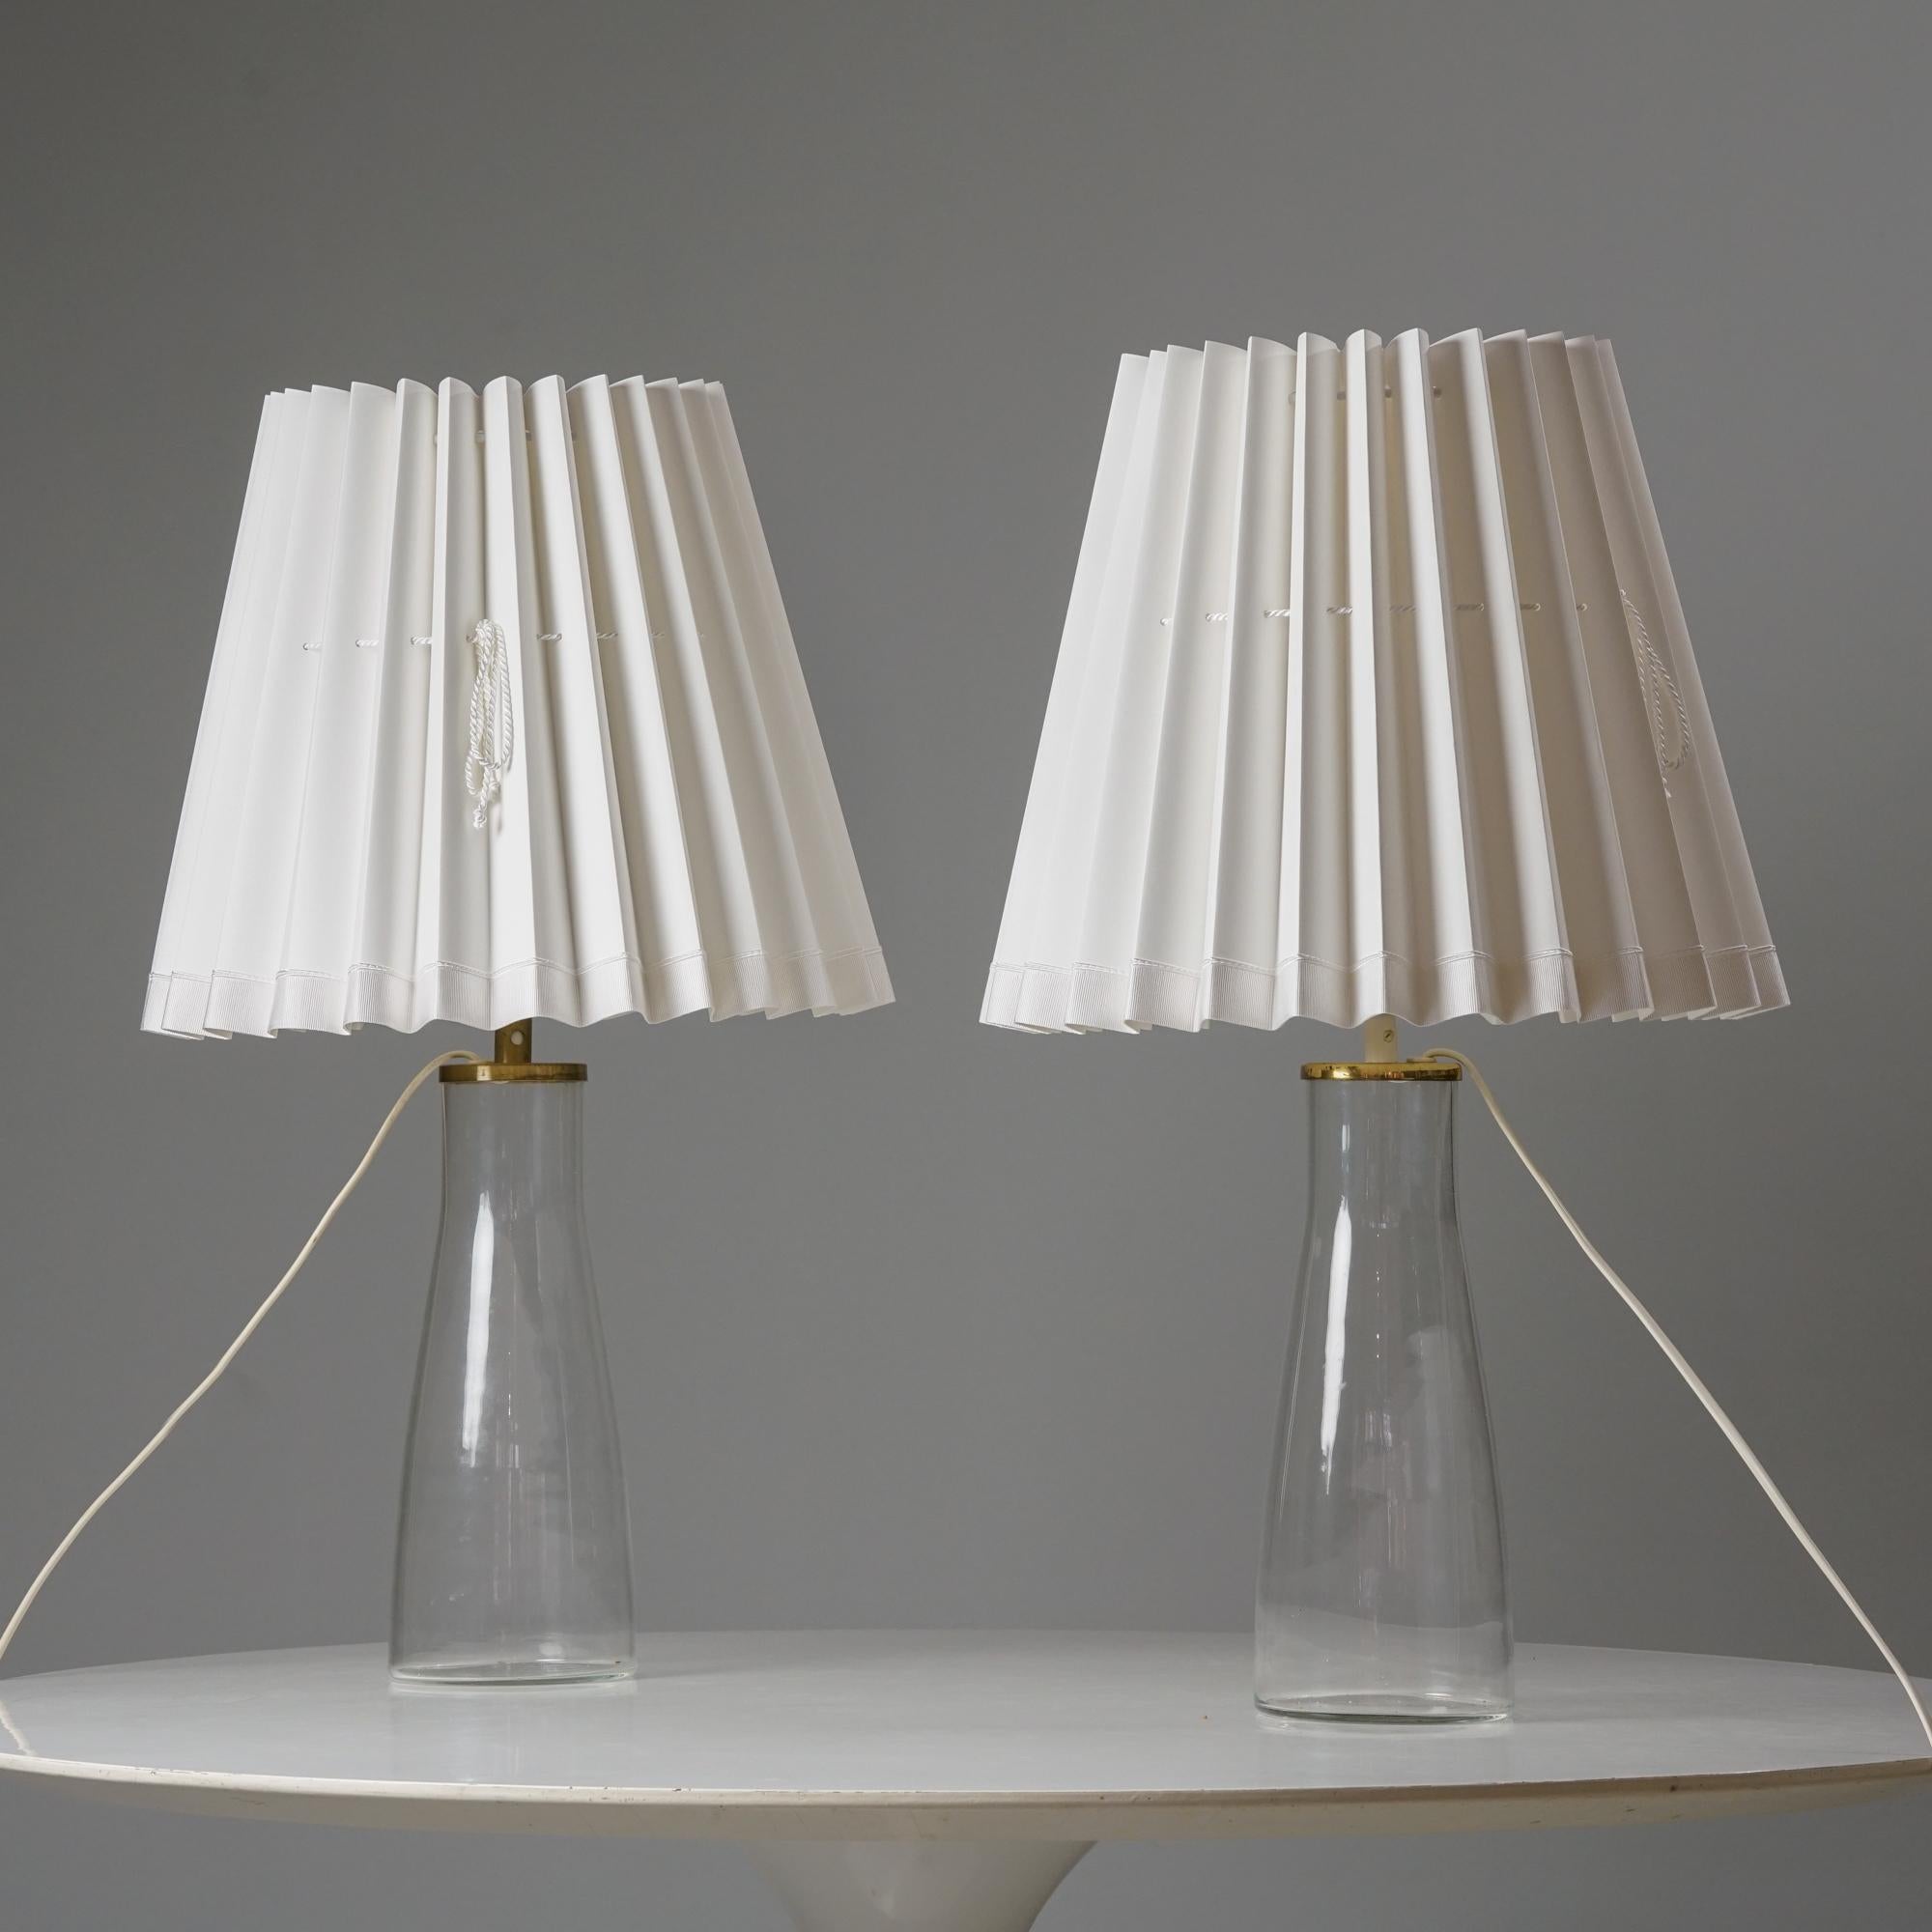 Pair of Model M15 table lamps by Maire Gullichsen for Artek from the 1960s. Glass frame, with brass details and fabric shades. Good vintage condition, minor patina consistent with age and use. The table lamps are sold together. A classic well-known